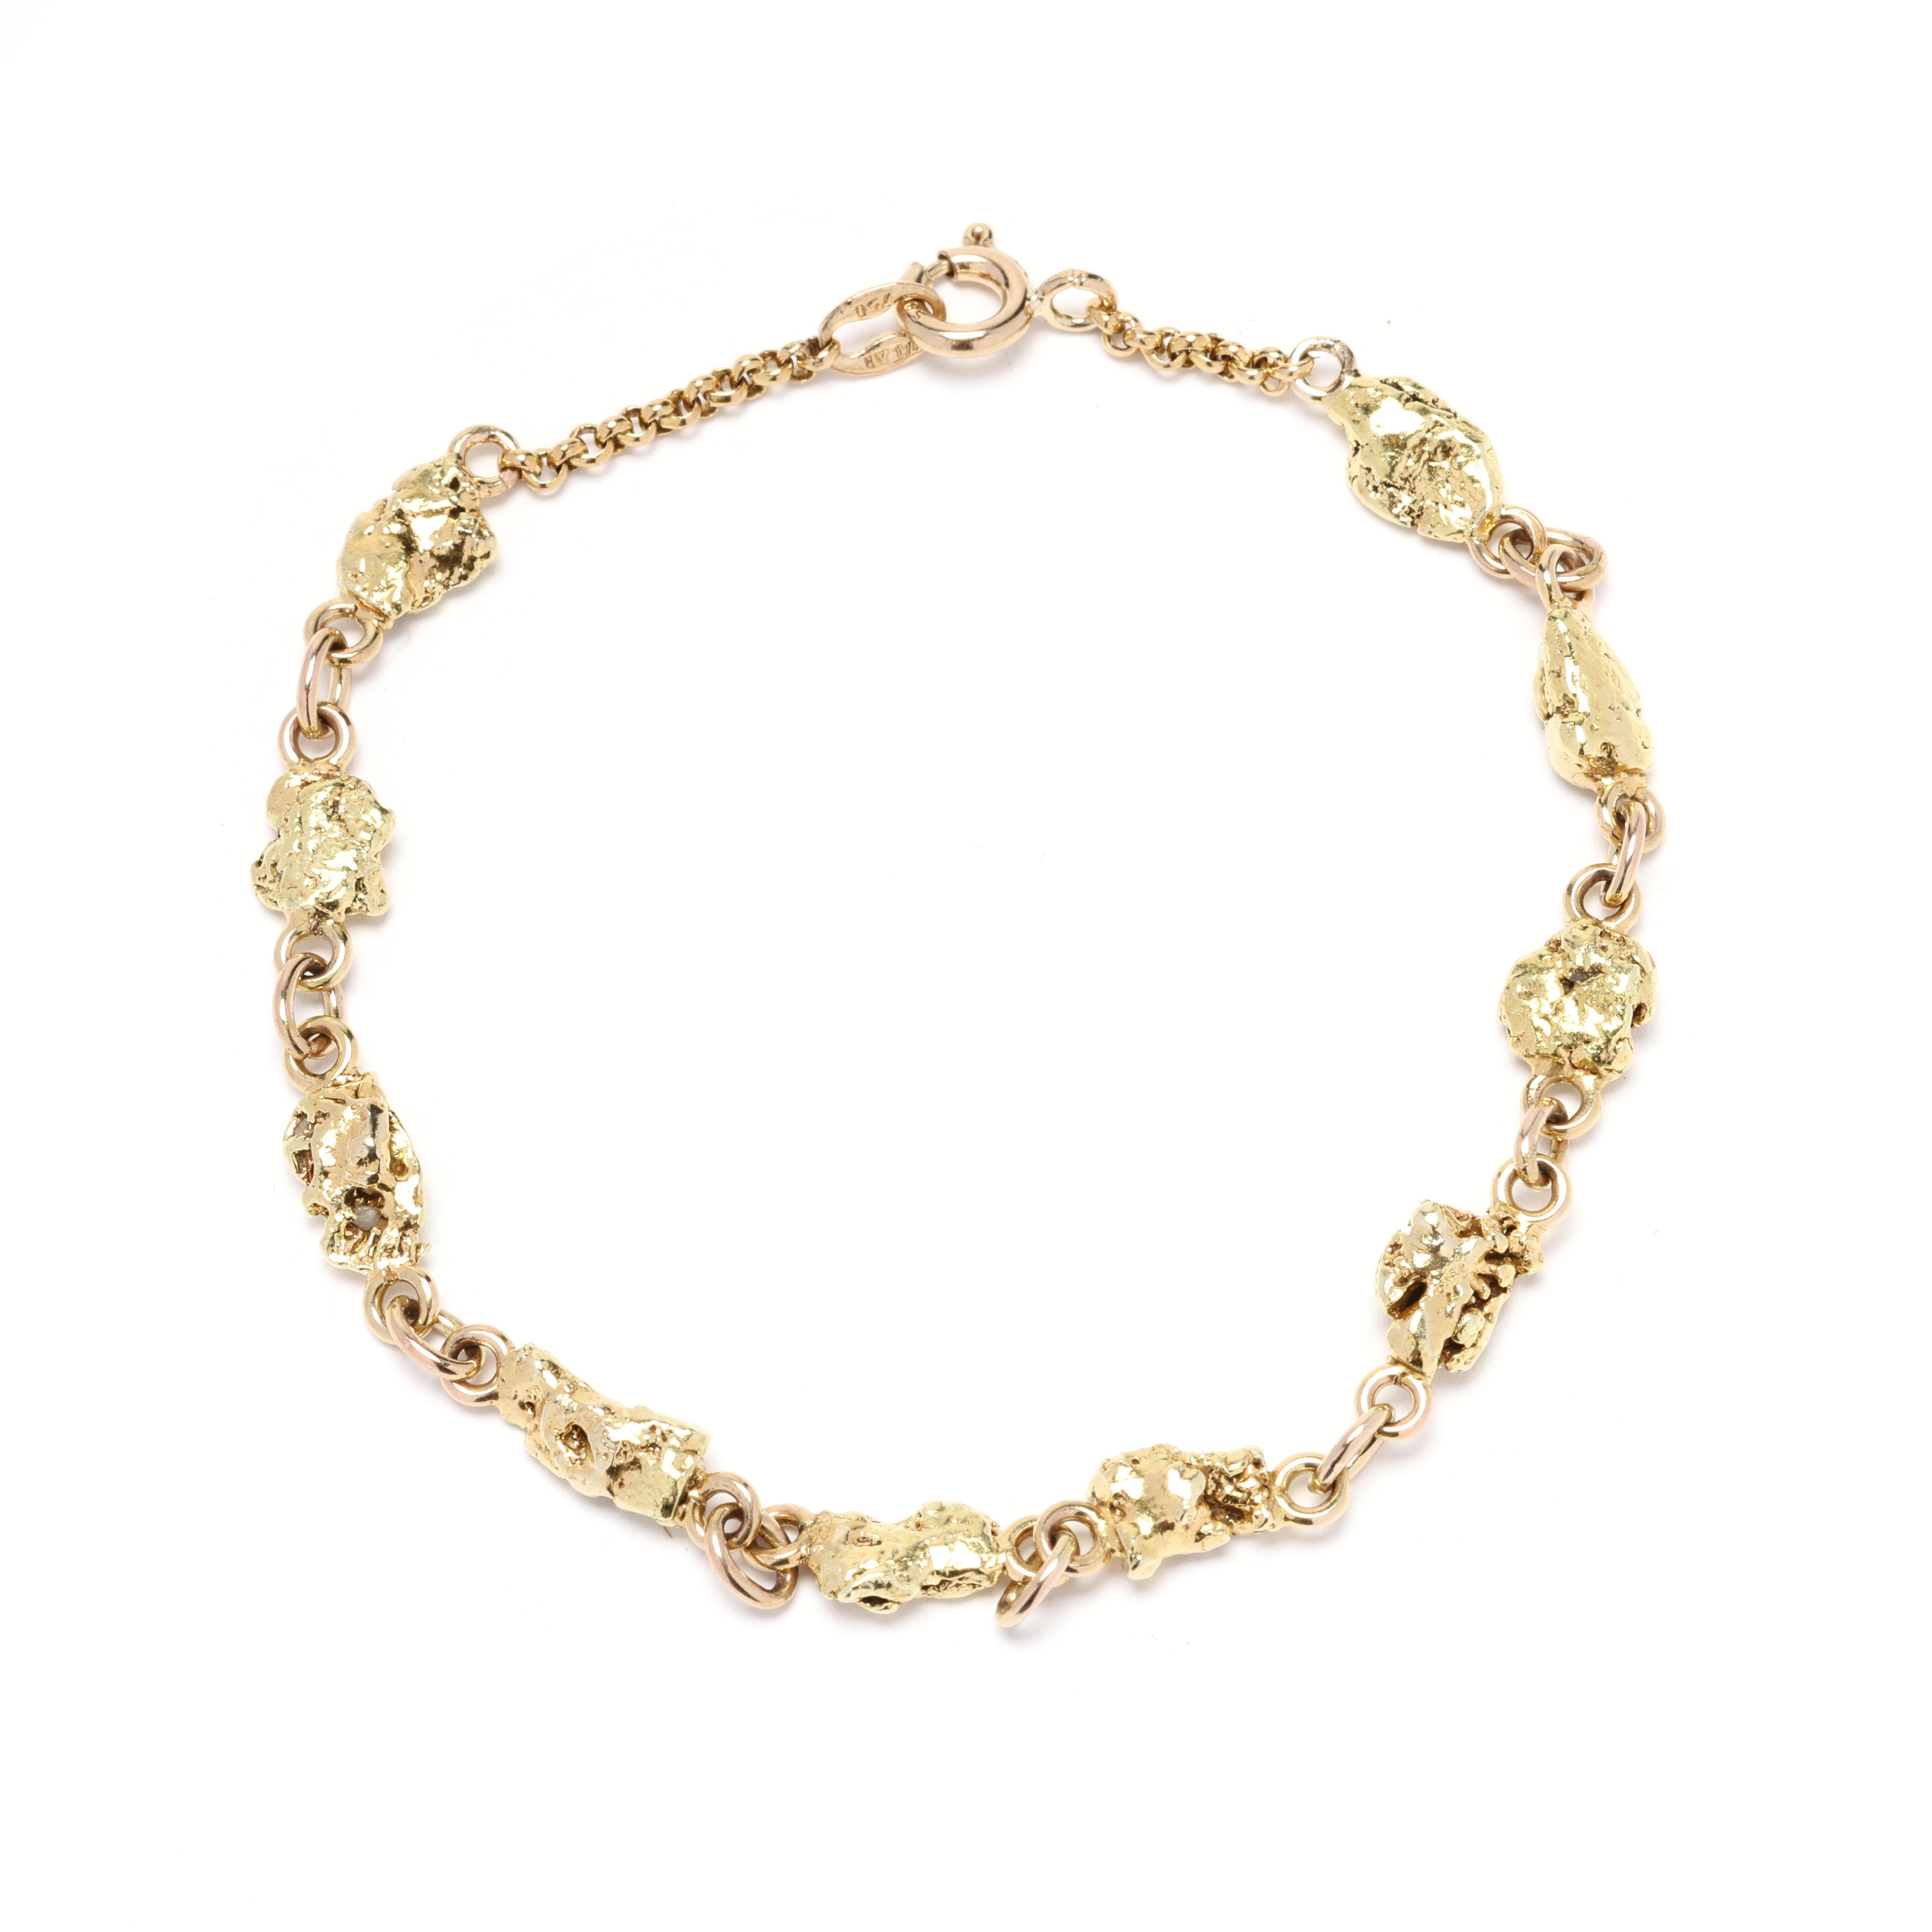 Women's 14k Gold Nugget Bracelet, 18k Yellow Gold Chain, Length 7.13 Inches, Stackable For Sale